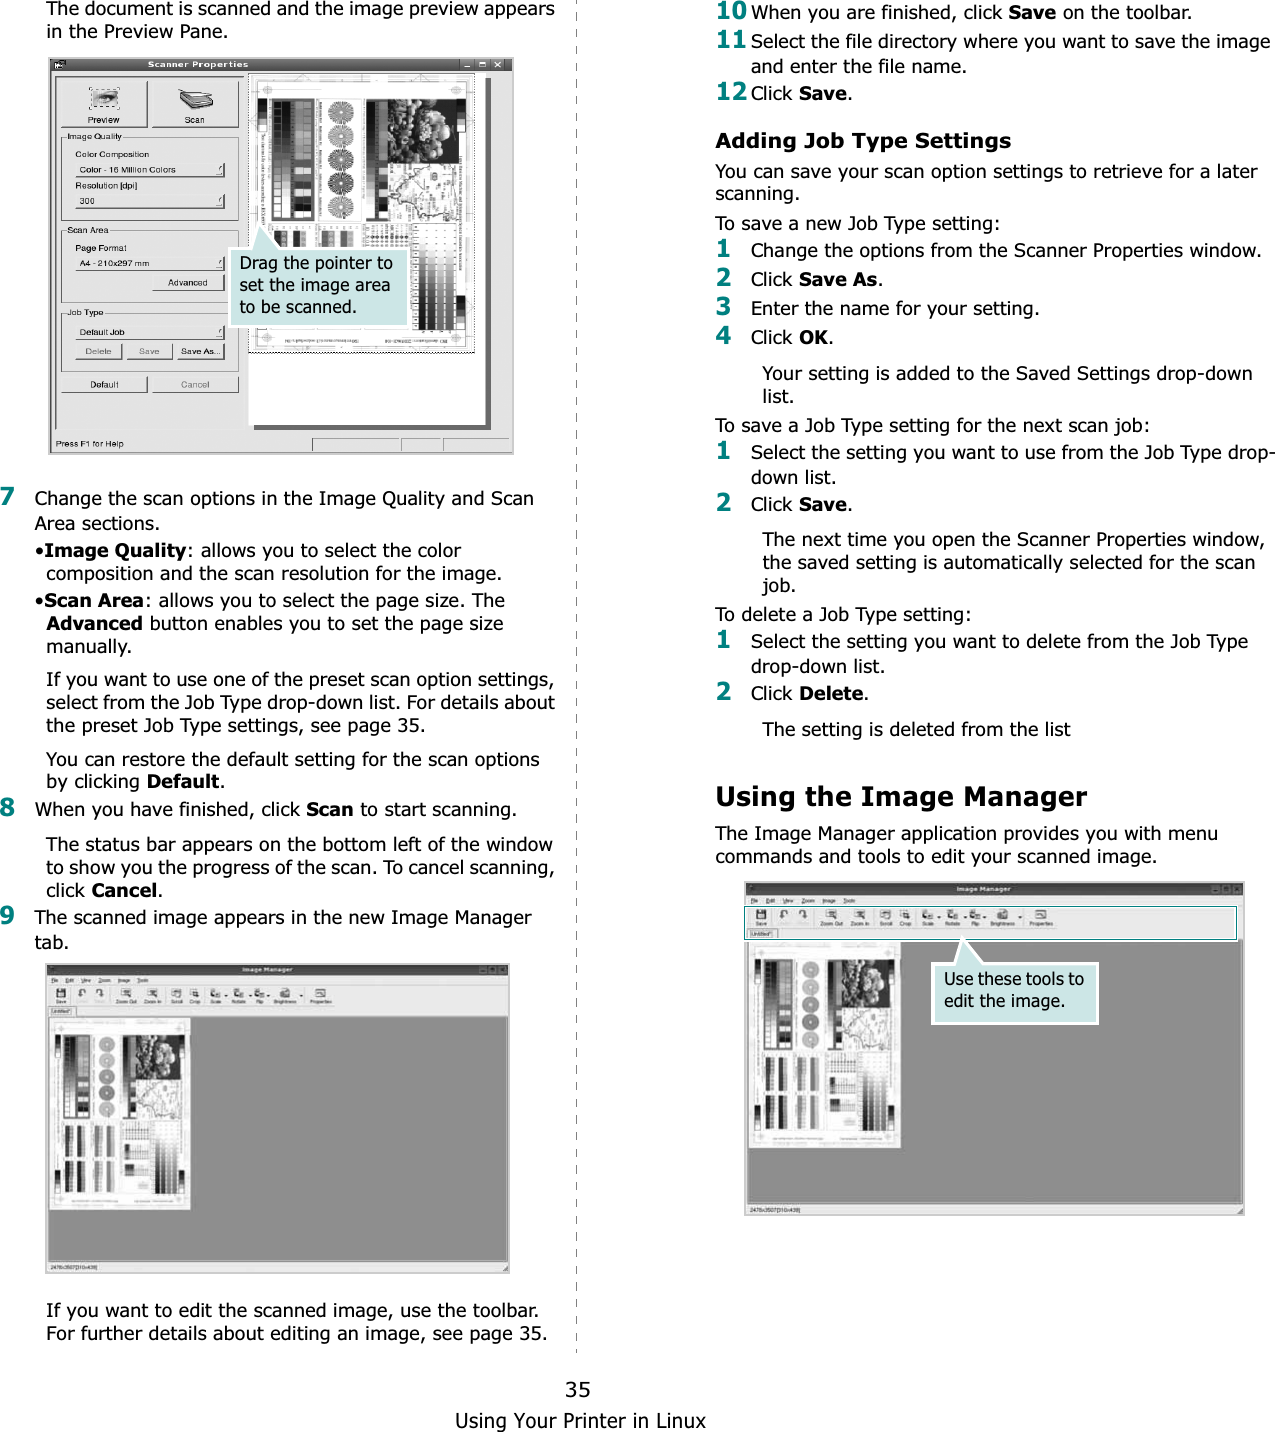 Using Your Printer in Linux35The document is scanned and the image preview appears in the Preview Pane.7Change the scan options in the Image Quality and Scan Area sections.•Image Quality: allows you to select the color composition and the scan resolution for the image.•Scan Area: allows you to select the page size. The Advanced button enables you to set the page size manually.If you want to use one of the preset scan option settings, select from the Job Type drop-down list. For details about the preset Job Type settings, see page 35.You can restore the default setting for the scan options by clicking Default.8When you have finished, click Scan to start scanning.The status bar appears on the bottom left of the window to show you the progress of the scan. To cancel scanning, click Cancel.9The scanned image appears in the new Image Manager tab.If you want to edit the scanned image, use the toolbar. For further details about editing an image, see page 35.Drag the pointer to set the image area to be scanned.10When you are finished, click Save on the toolbar.11Select the file directory where you want to save the image and enter the file name. 12Click Save.Adding Job Type SettingsYou can save your scan option settings to retrieve for a later scanning.To save a new Job Type setting:1Change the options from the Scanner Properties window.2Click Save As.3Enter the name for your setting.4Click OK.Your setting is added to the Saved Settings drop-down list.To save a Job Type setting for the next scan job:1Select the setting you want to use from the Job Type drop-down list.2Click Save.The next time you open the Scanner Properties window, the saved setting is automatically selected for the scan job.To delete a Job Type setting:1Select the setting you want to delete from the Job Type drop-down list.2Click Delete.The setting is deleted from the listUsing the Image ManagerThe Image Manager application provides you with menu commands and tools to edit your scanned image.Use these tools to edit the image.